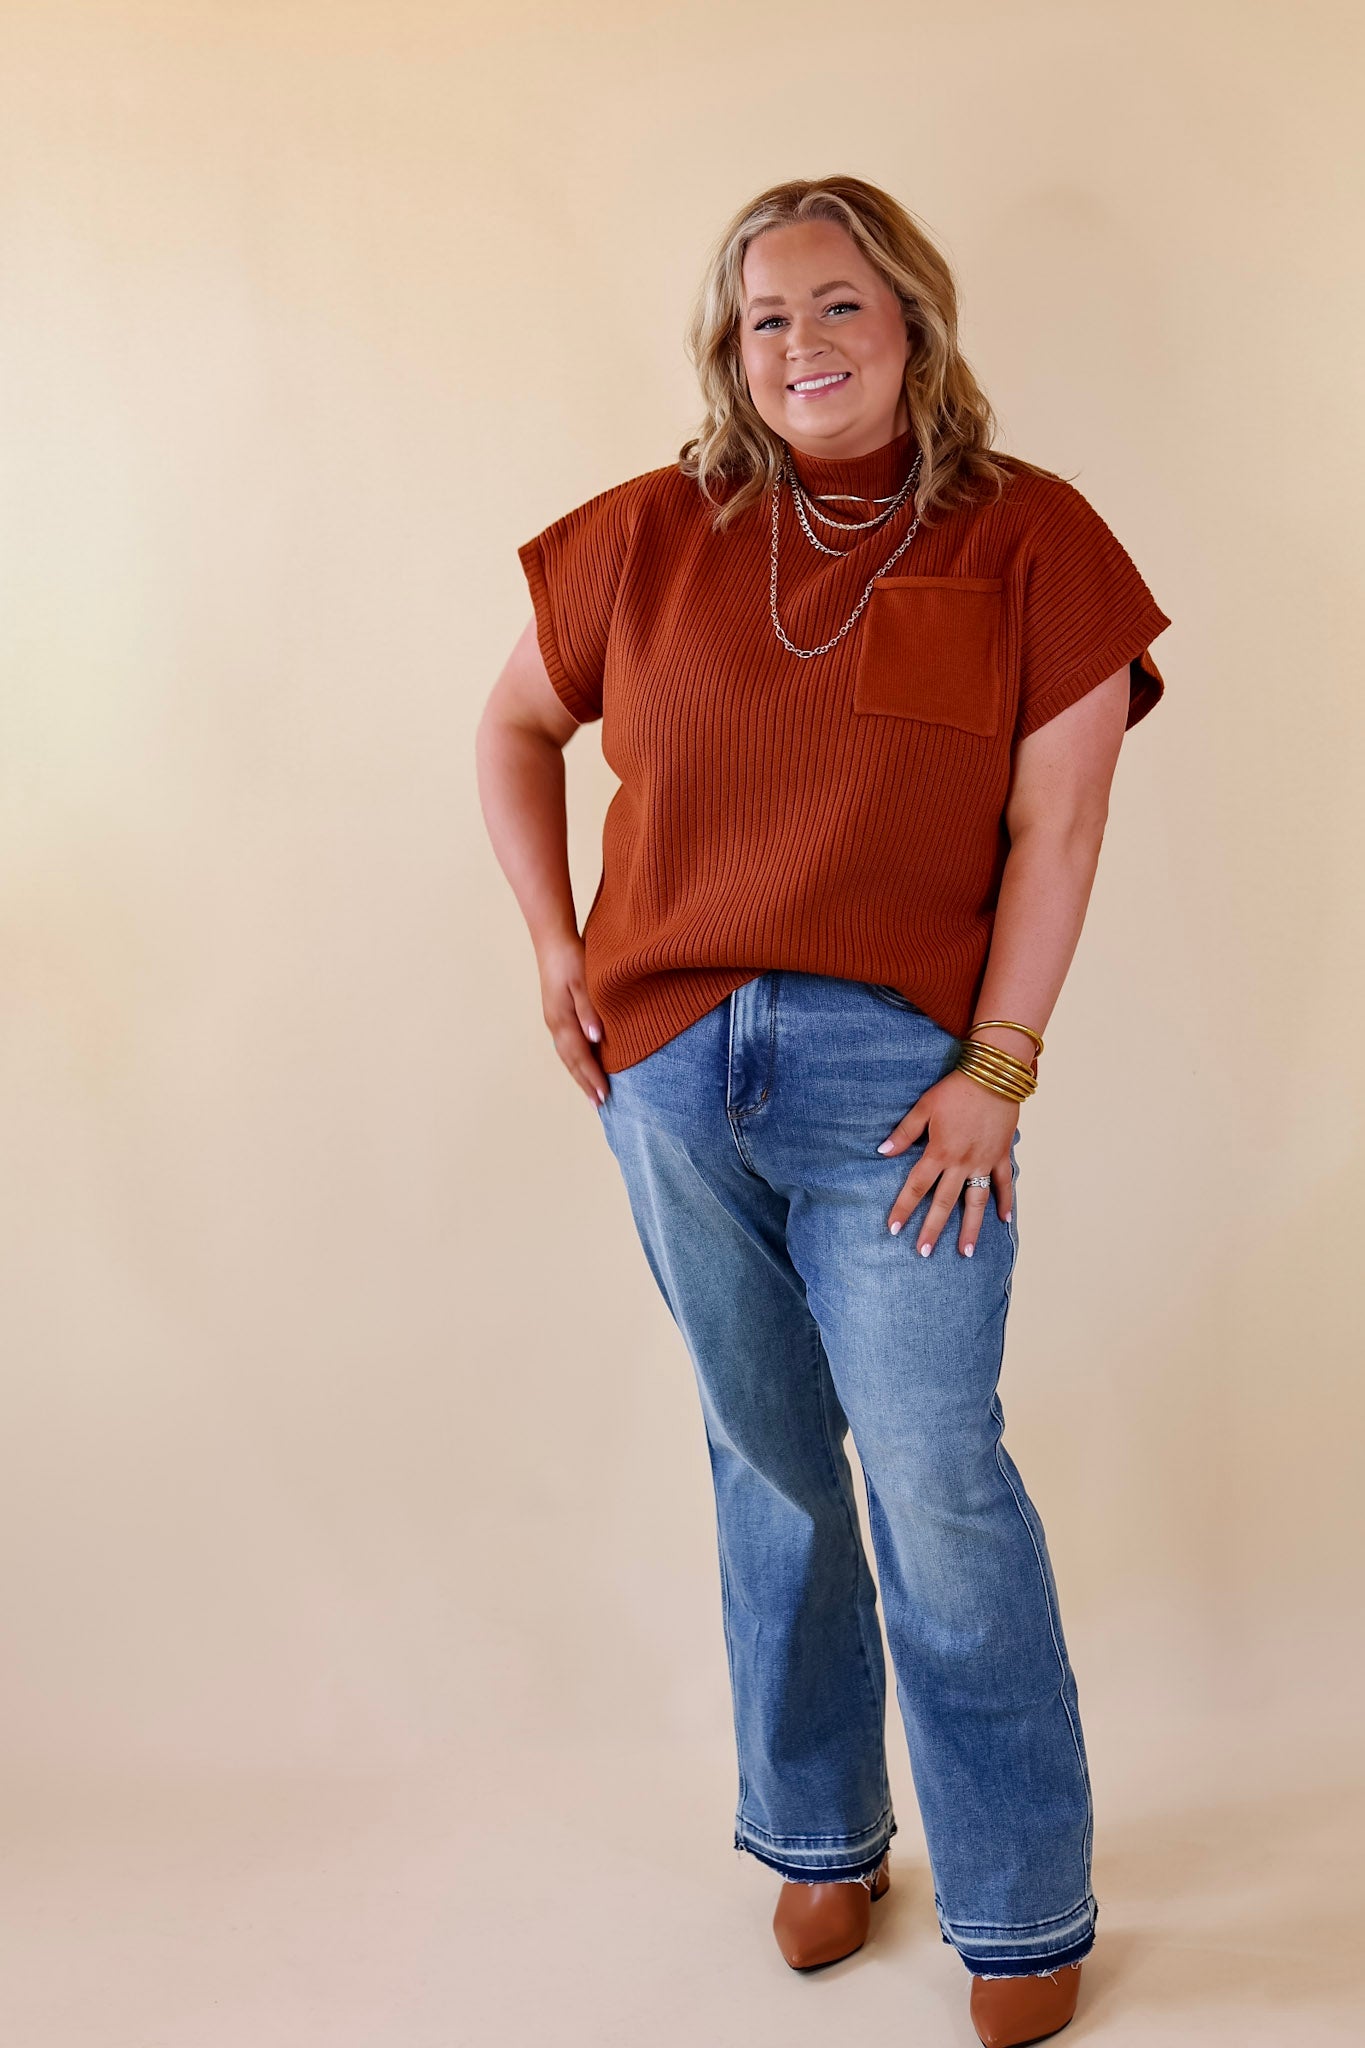 City Sights Cap Sleeve Sweater Top in Copper Brown - Giddy Up Glamour Boutique